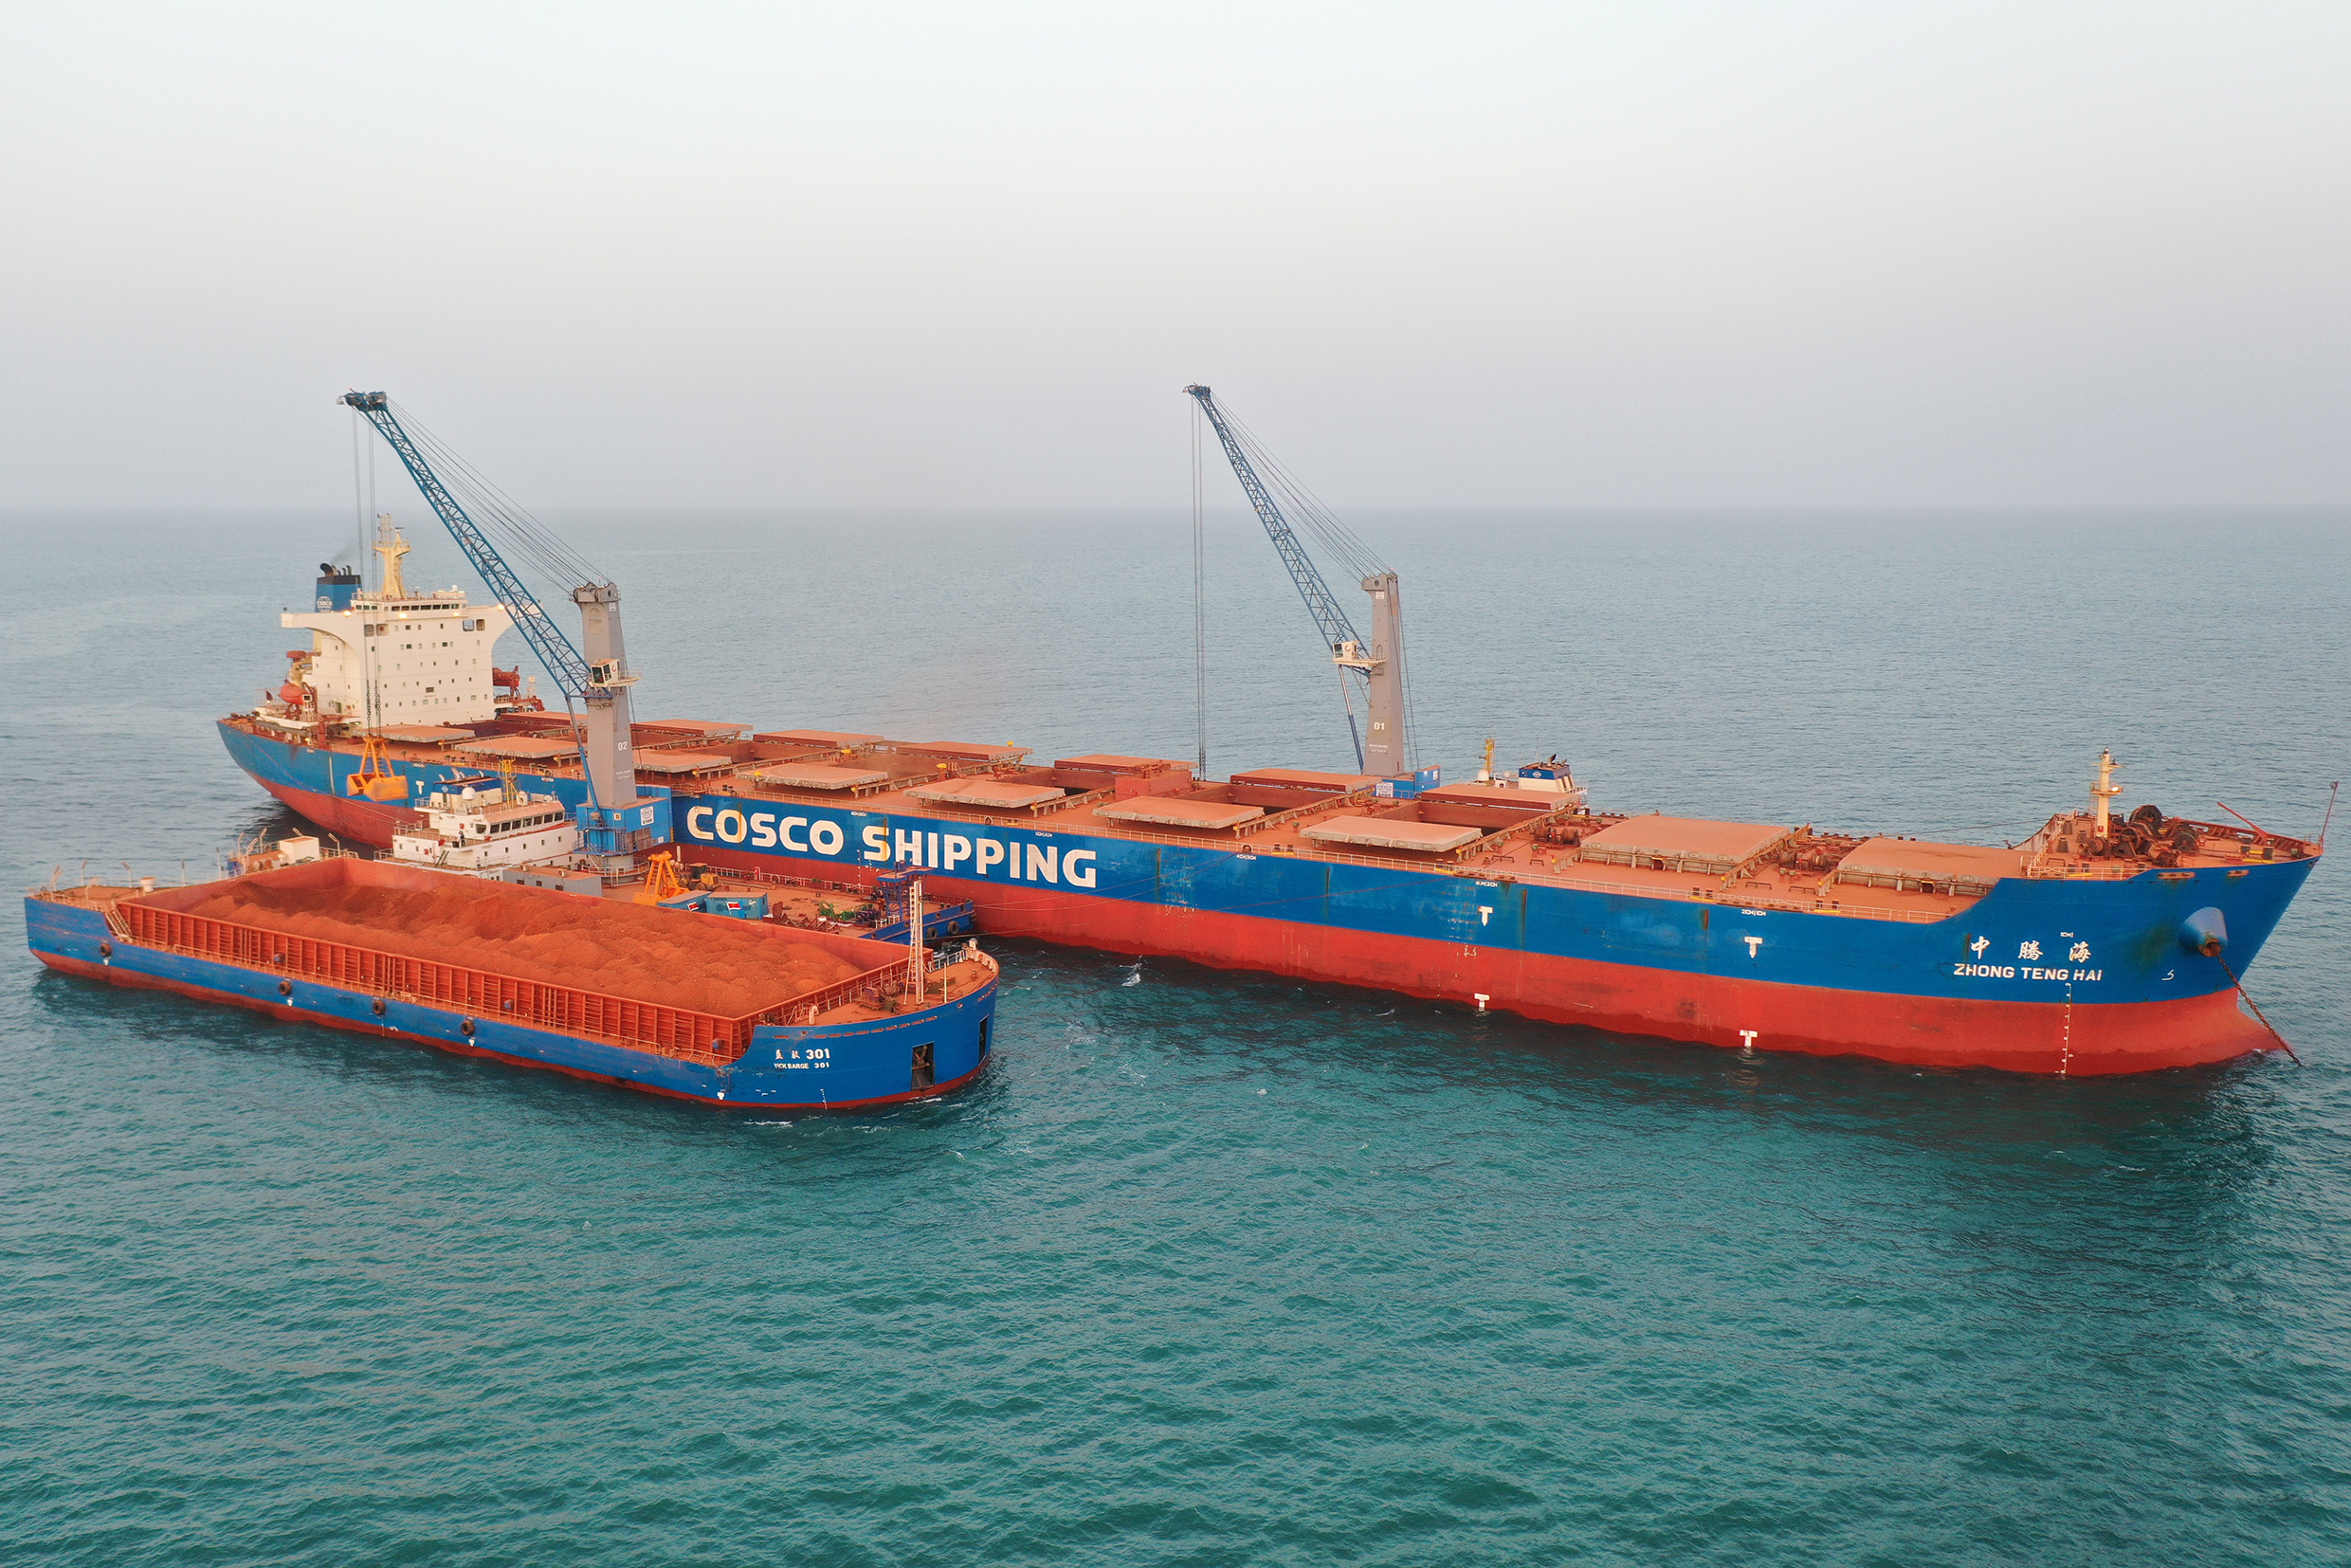 Cosco’s first two Konecranes Gottwald cranes on barge handling bauxite off the west coast of Africa